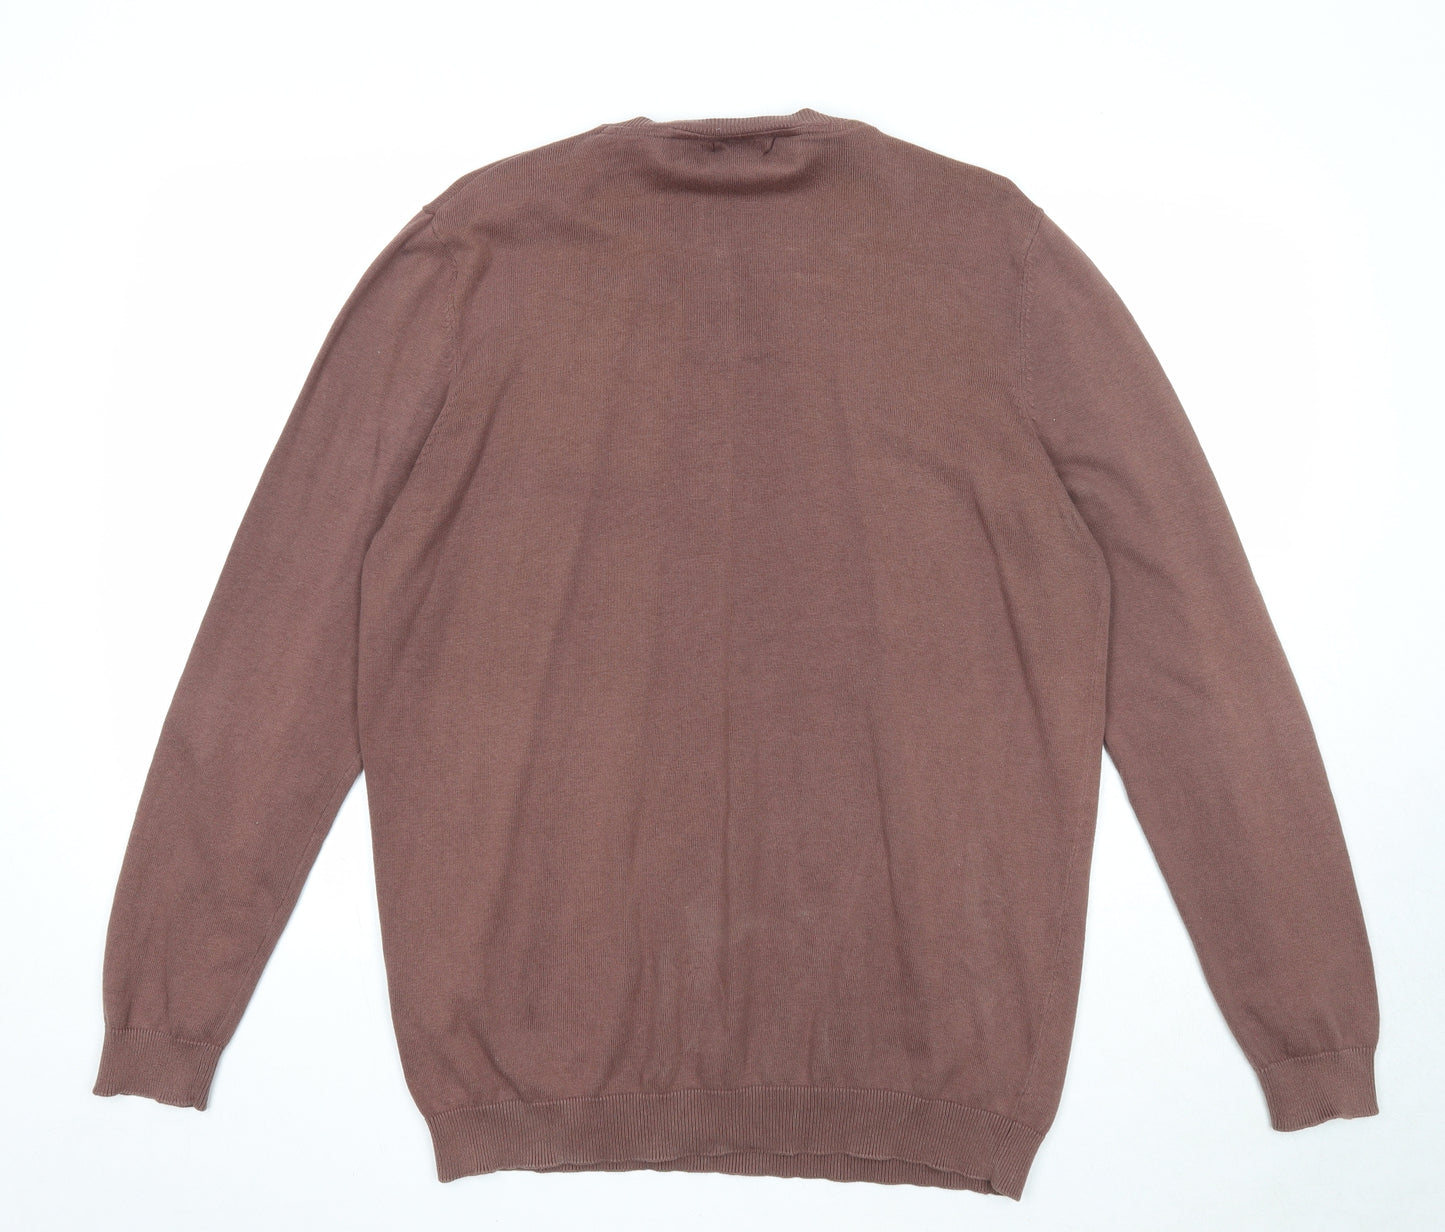 New Look Mens Brown V-Neck Cotton Pullover Jumper Size XL Long Sleeve